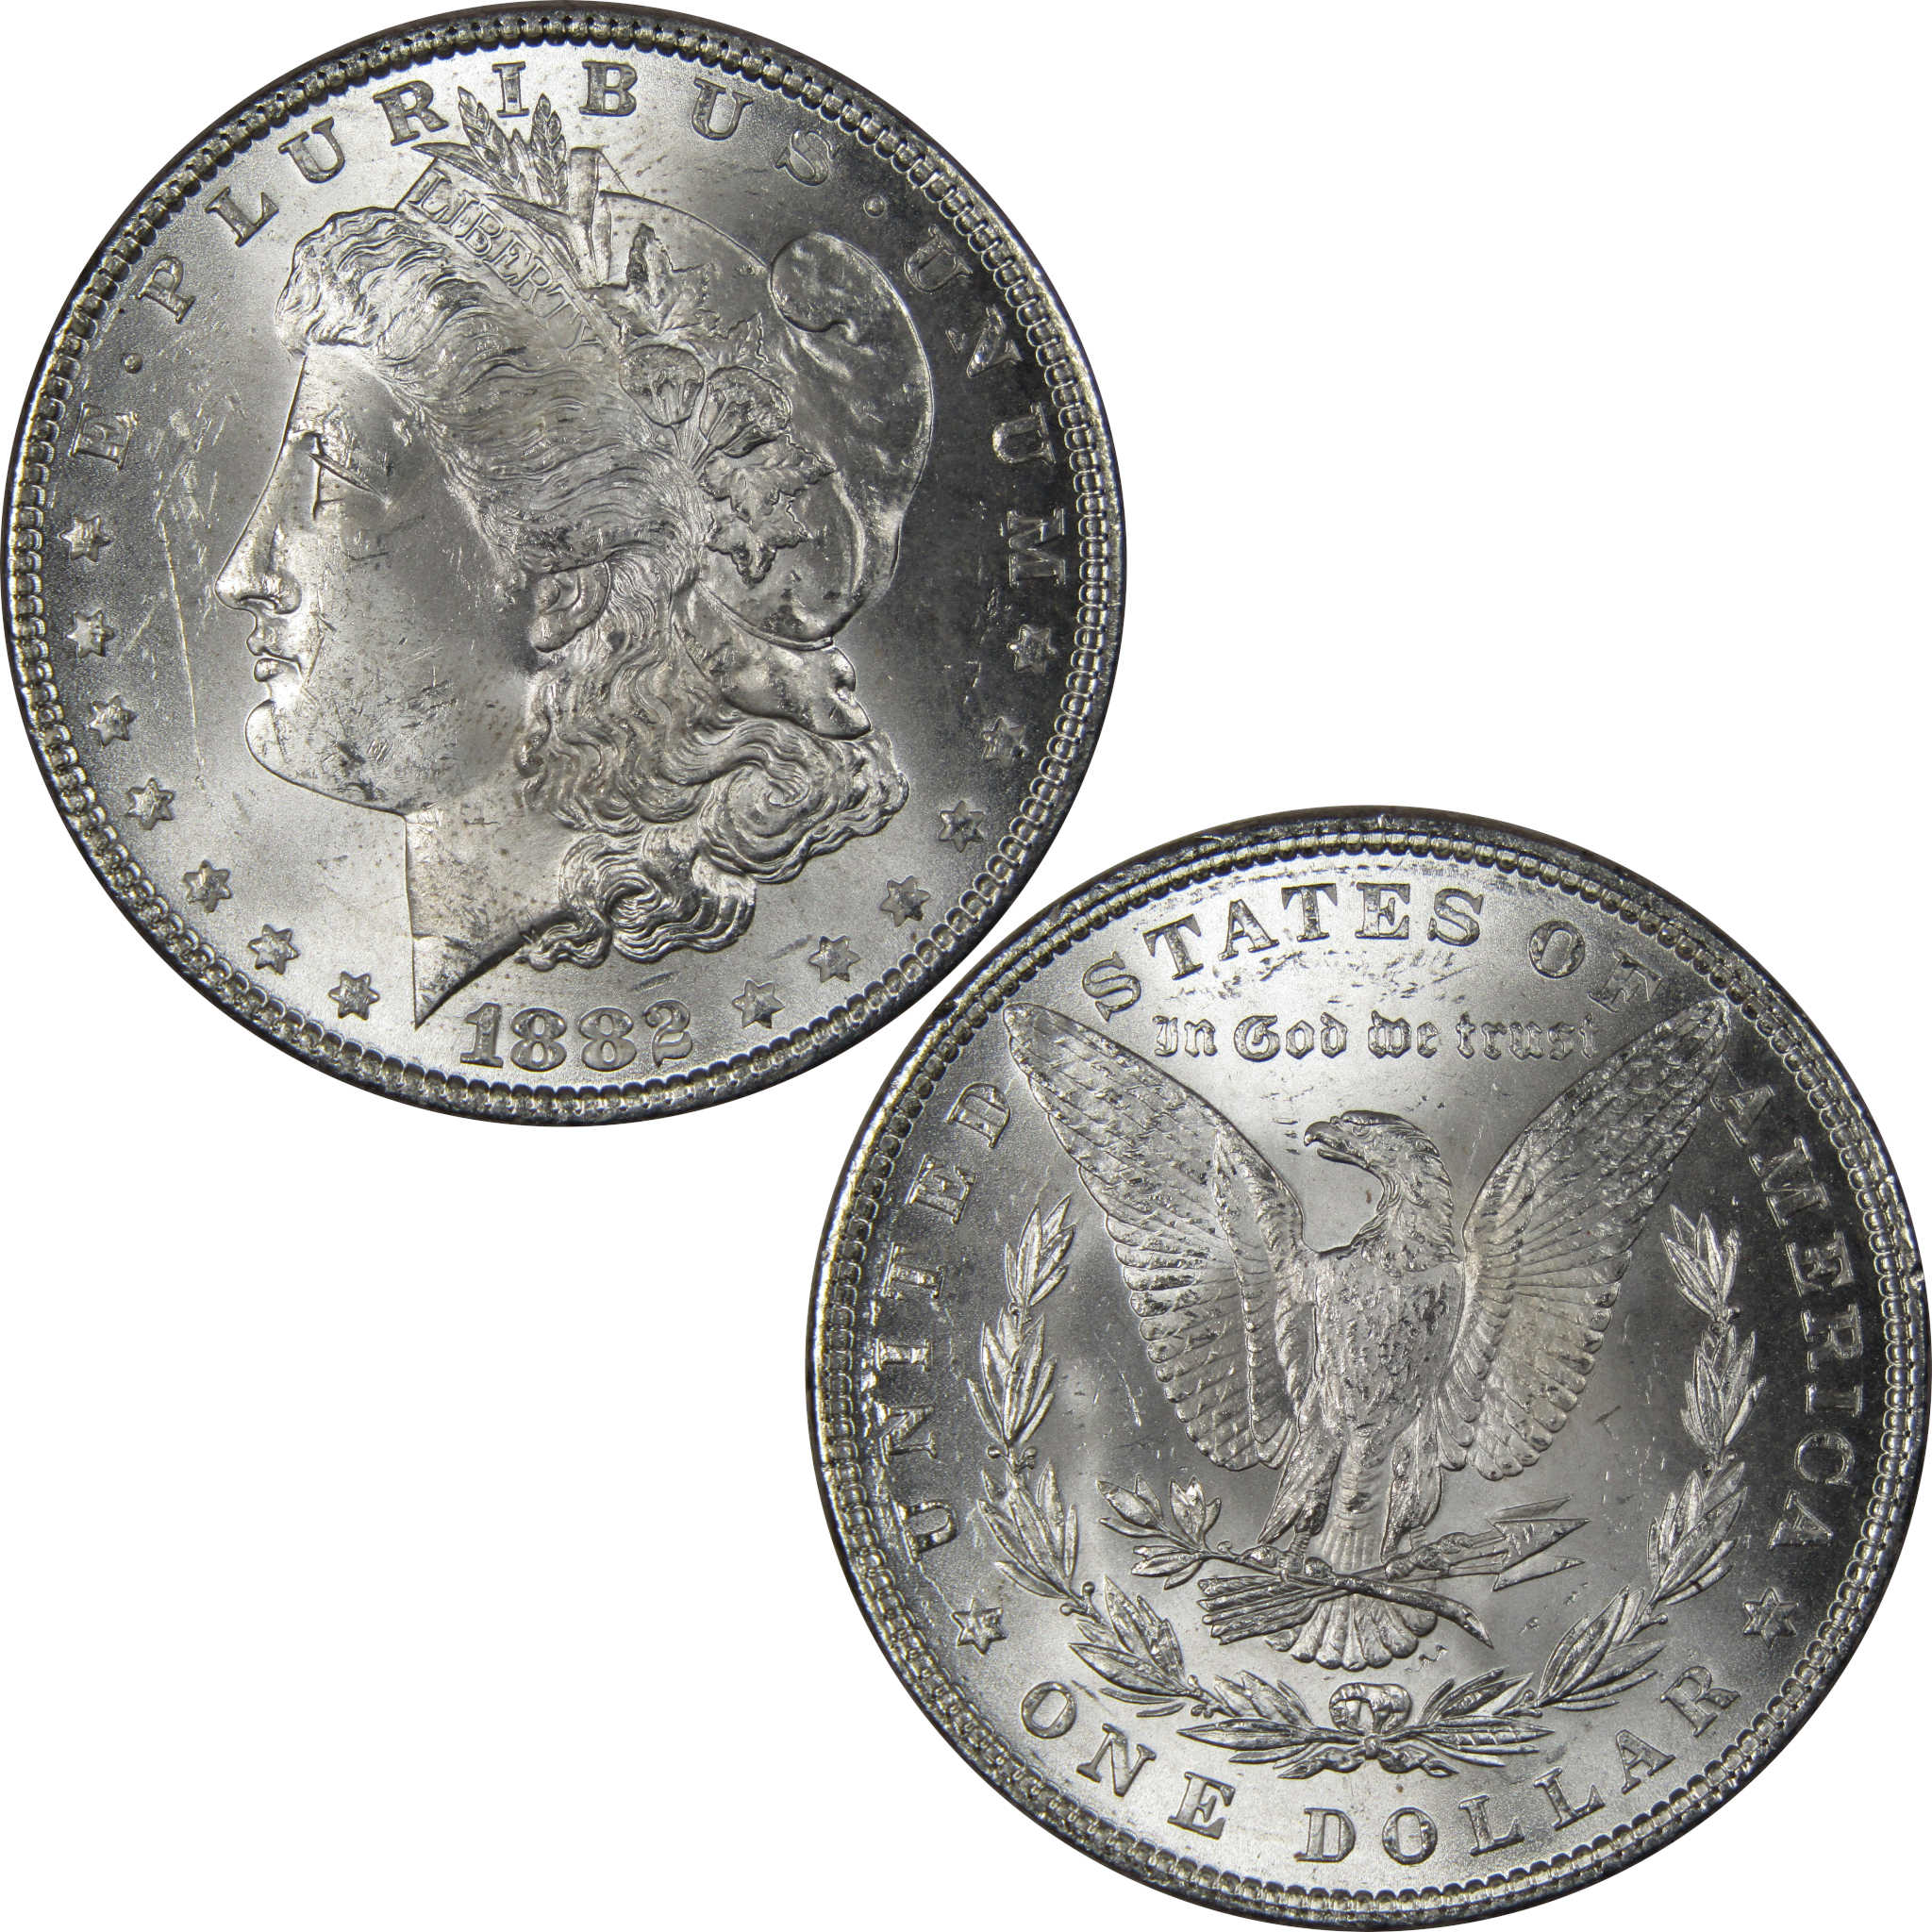 1882 Morgan Dollar BU Uncirculated Mint State 90% Silver SKU:IPC9676 - Morgan coin - Morgan silver dollar - Morgan silver dollar for sale - Profile Coins &amp; Collectibles